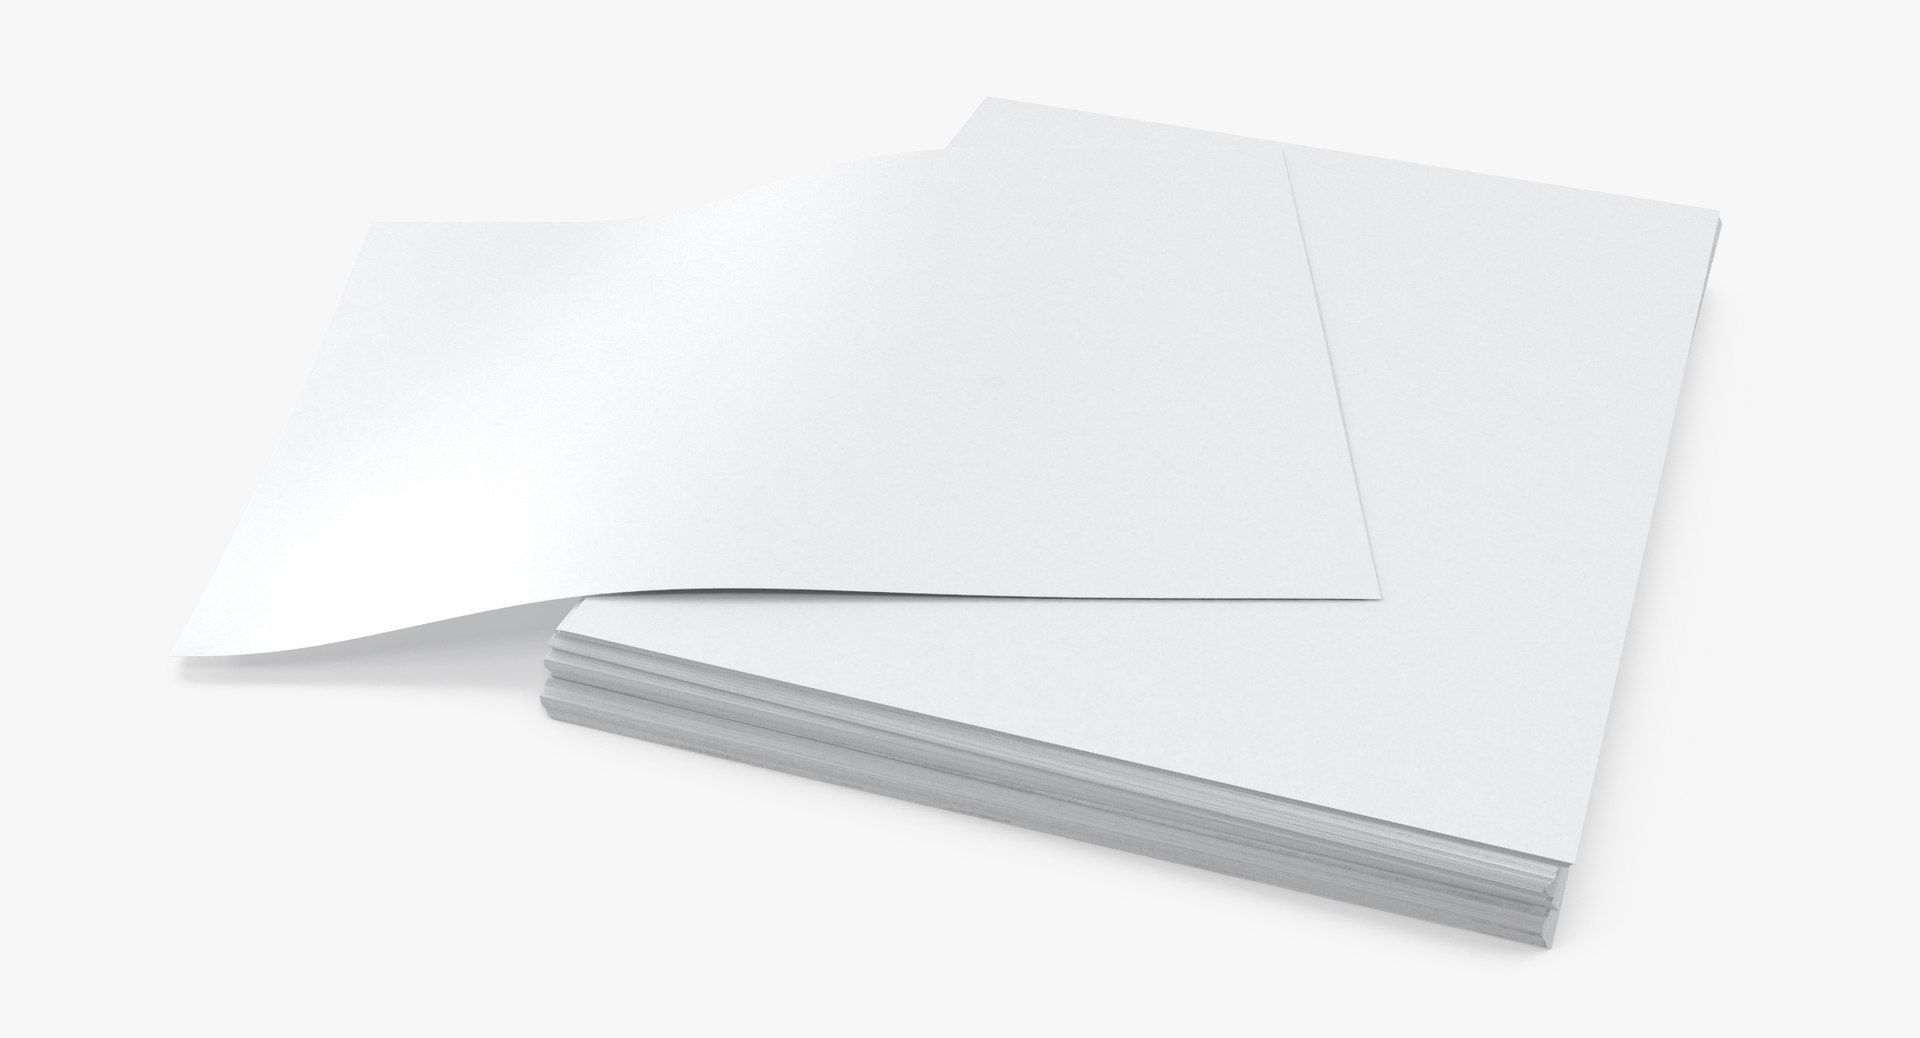 Small Stack Paper Sheets 3D Model - TurboSquid 1206503